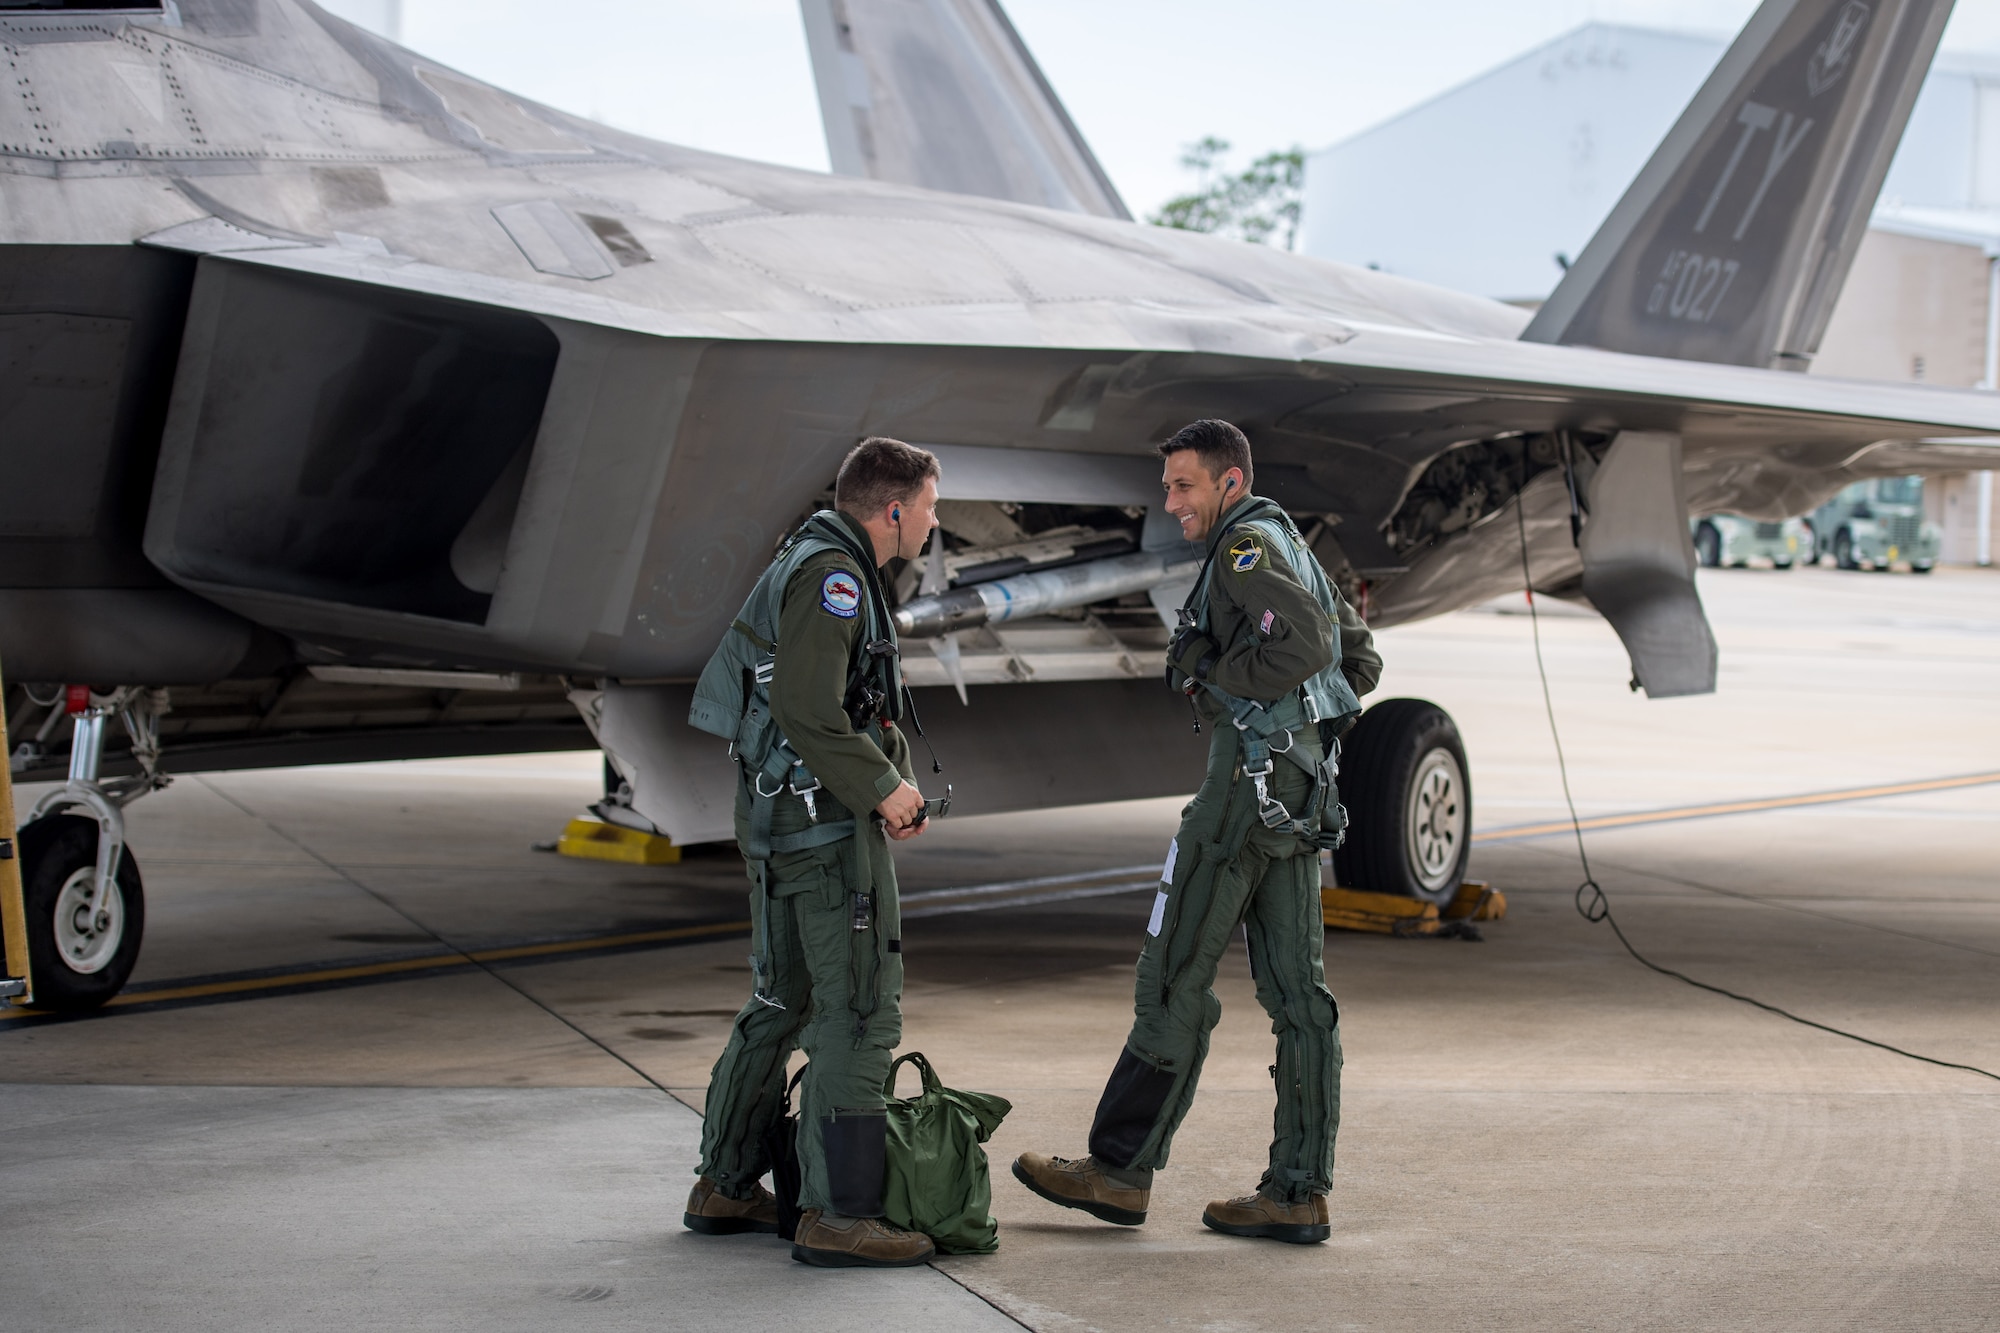 A U.S. Air Force F-22 Raptor pilot, 43rd Fighter Squadron from Tyndall Air Force Base, briefs the next pilot to fly the aircraft after hot pit refueling at Eglin AFB, Florida, July 2, 2019.